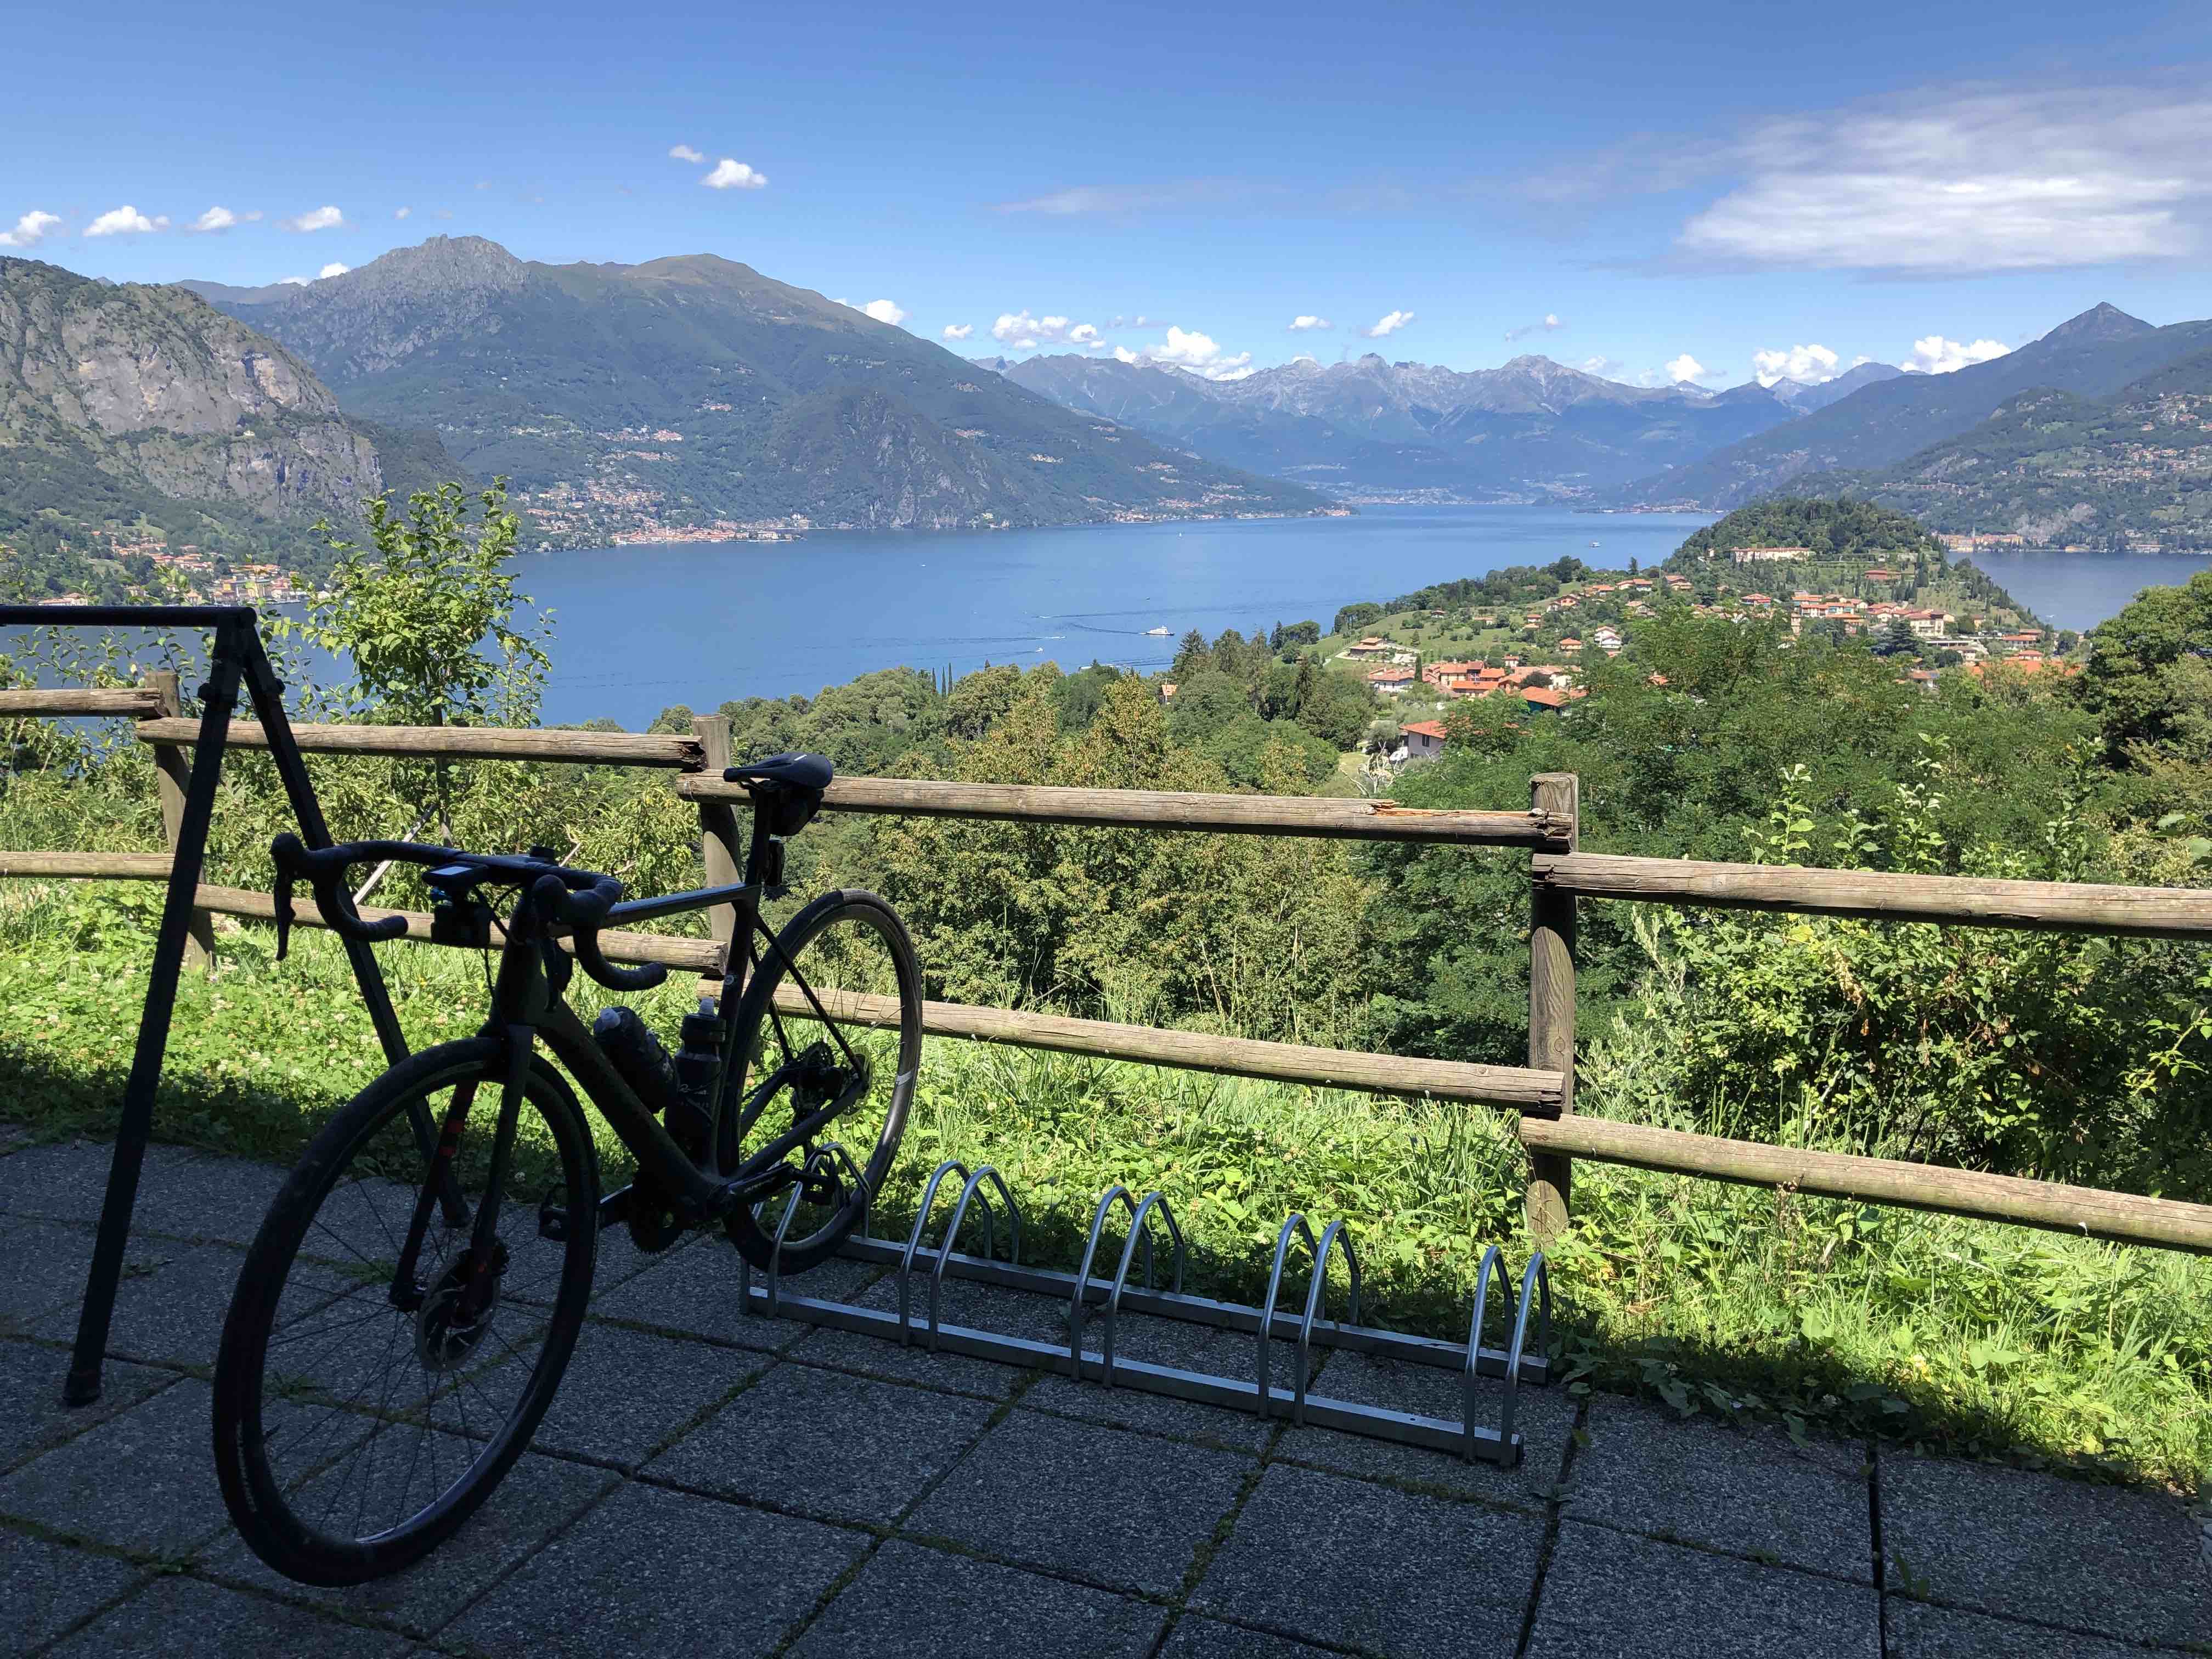 Bicycle hanging from rack with view out over Lake Como at the Como Lago Bike shop in Bellagio, Italy